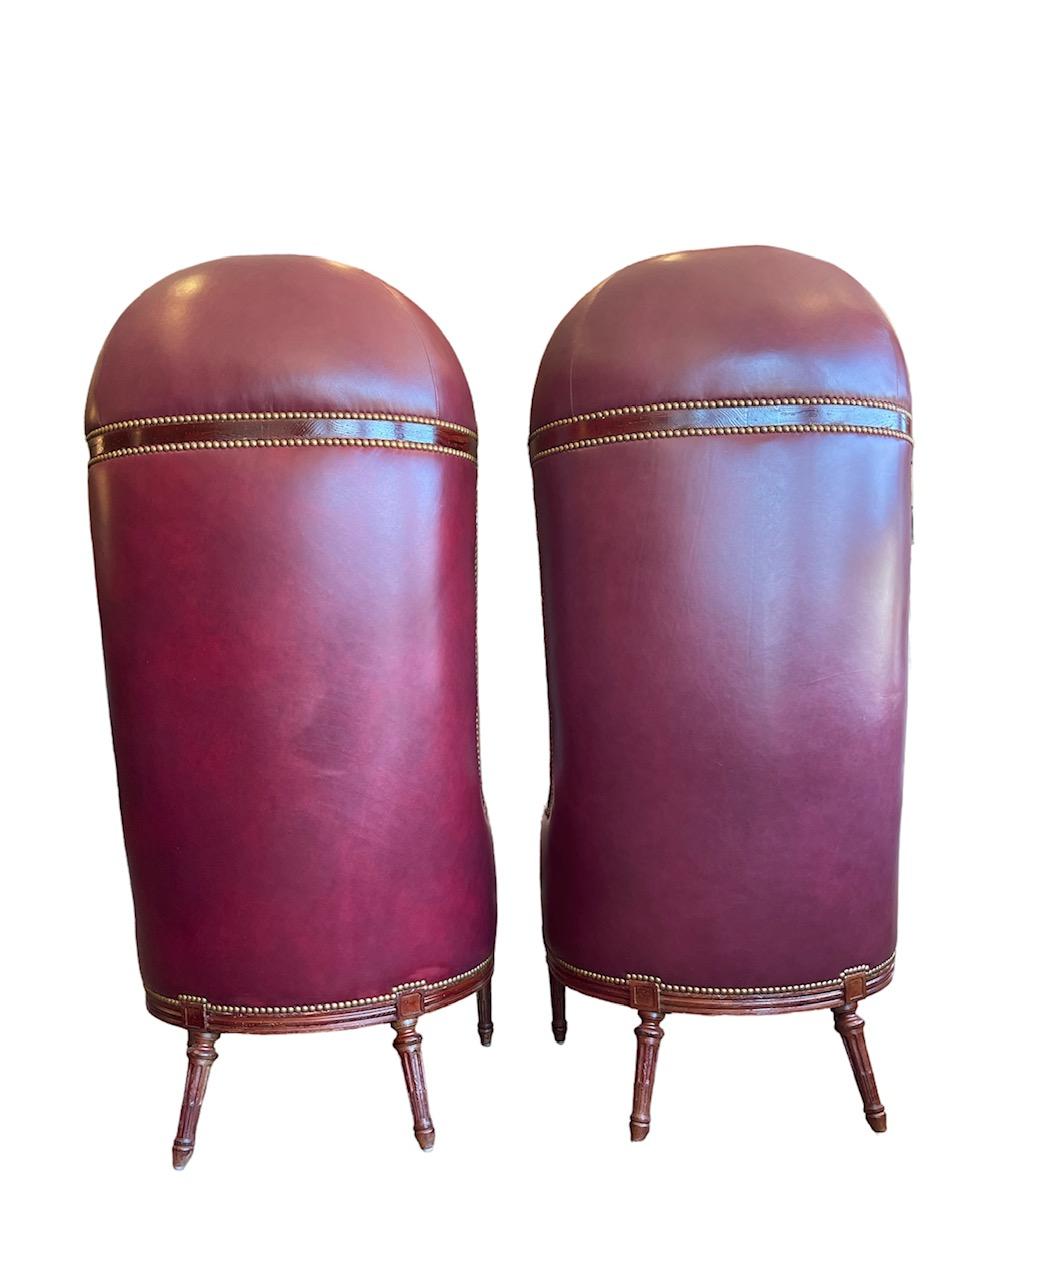 A lustrous crushed red velvet paints the concave back of this rare beauty. The sheer height of these chairs gives them a throne-like feeling. The outside back is covered in a satiny rouge Italian velvet that is decorated with gold French natural